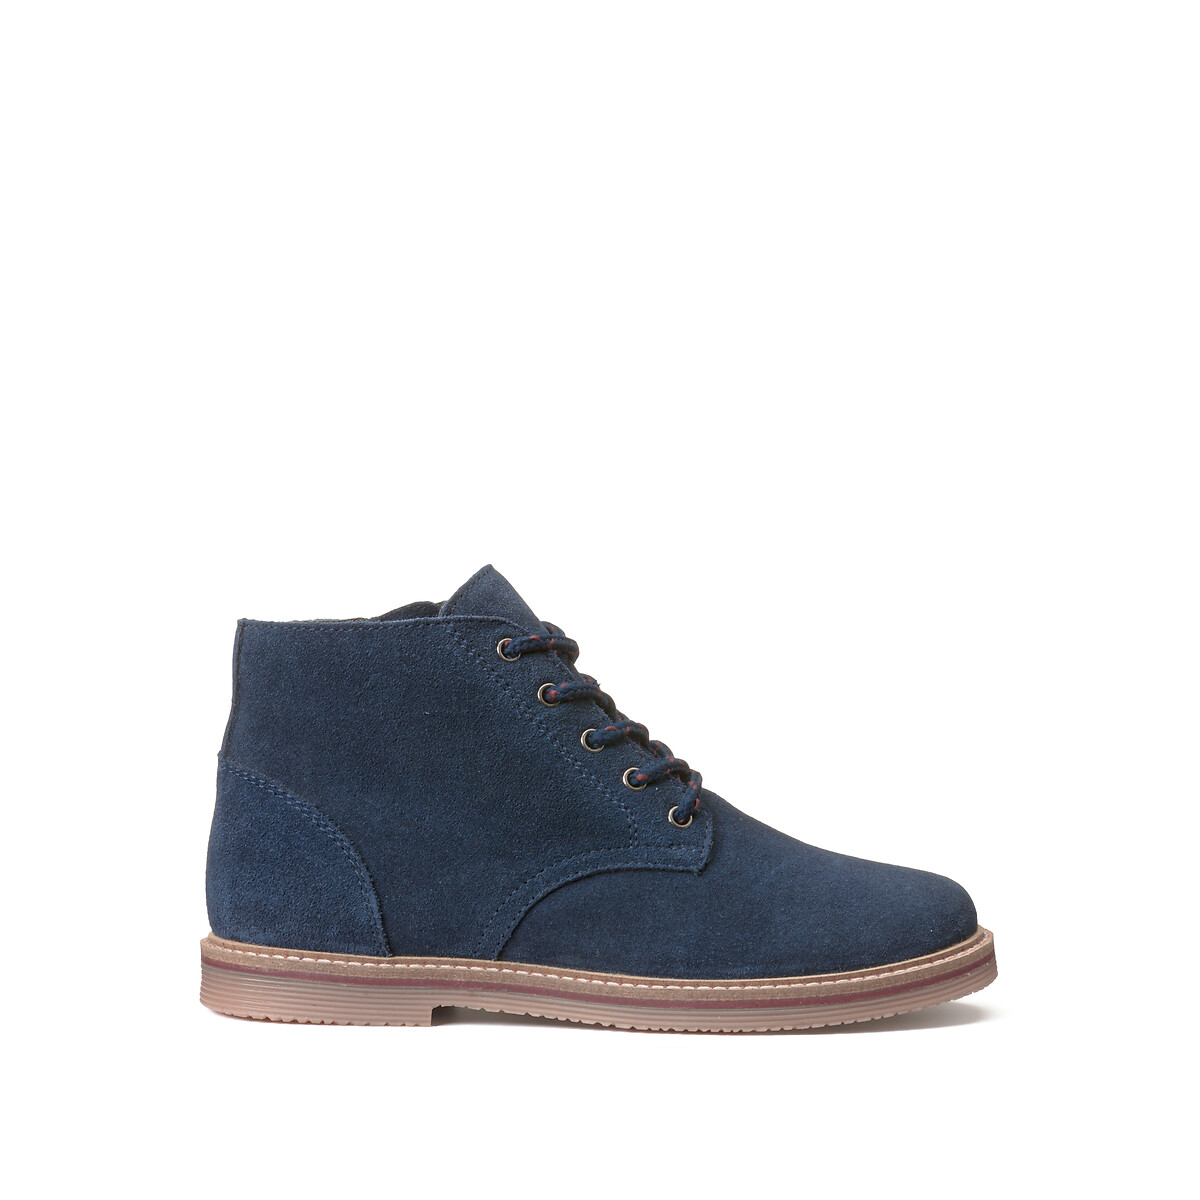 Kids Suede Ankle Boots with Zip Fastening and Laces